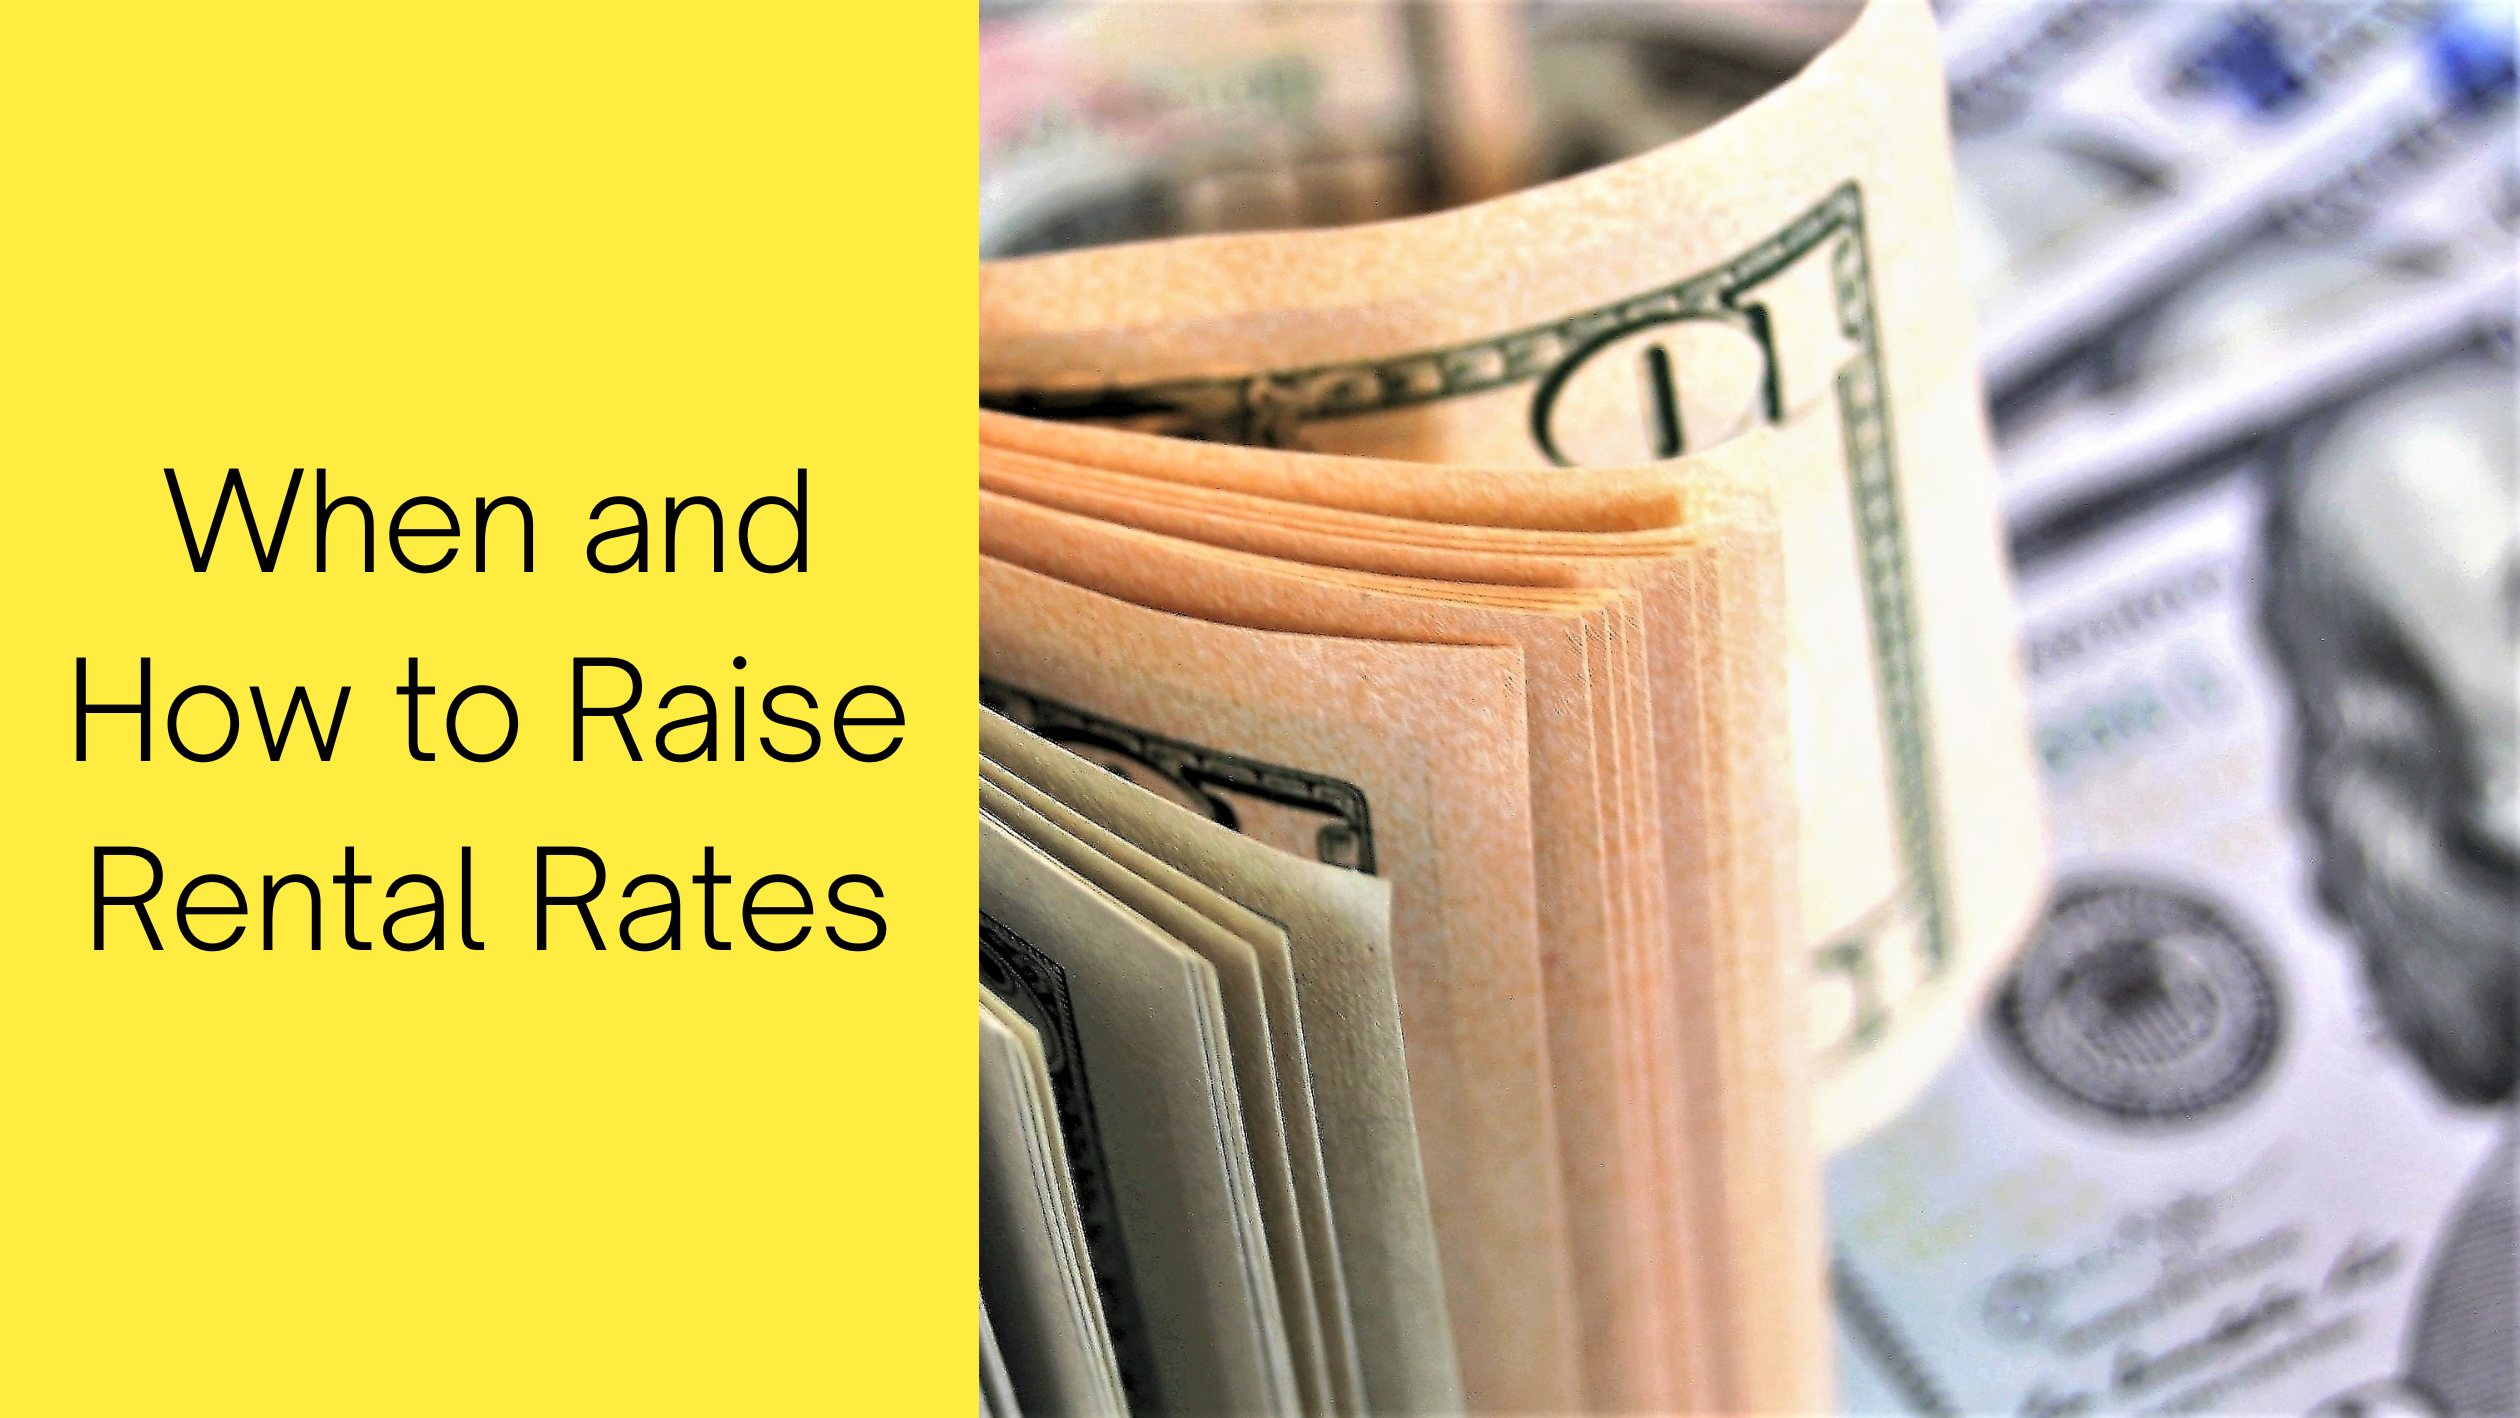 When and How to Raise Rental Rates